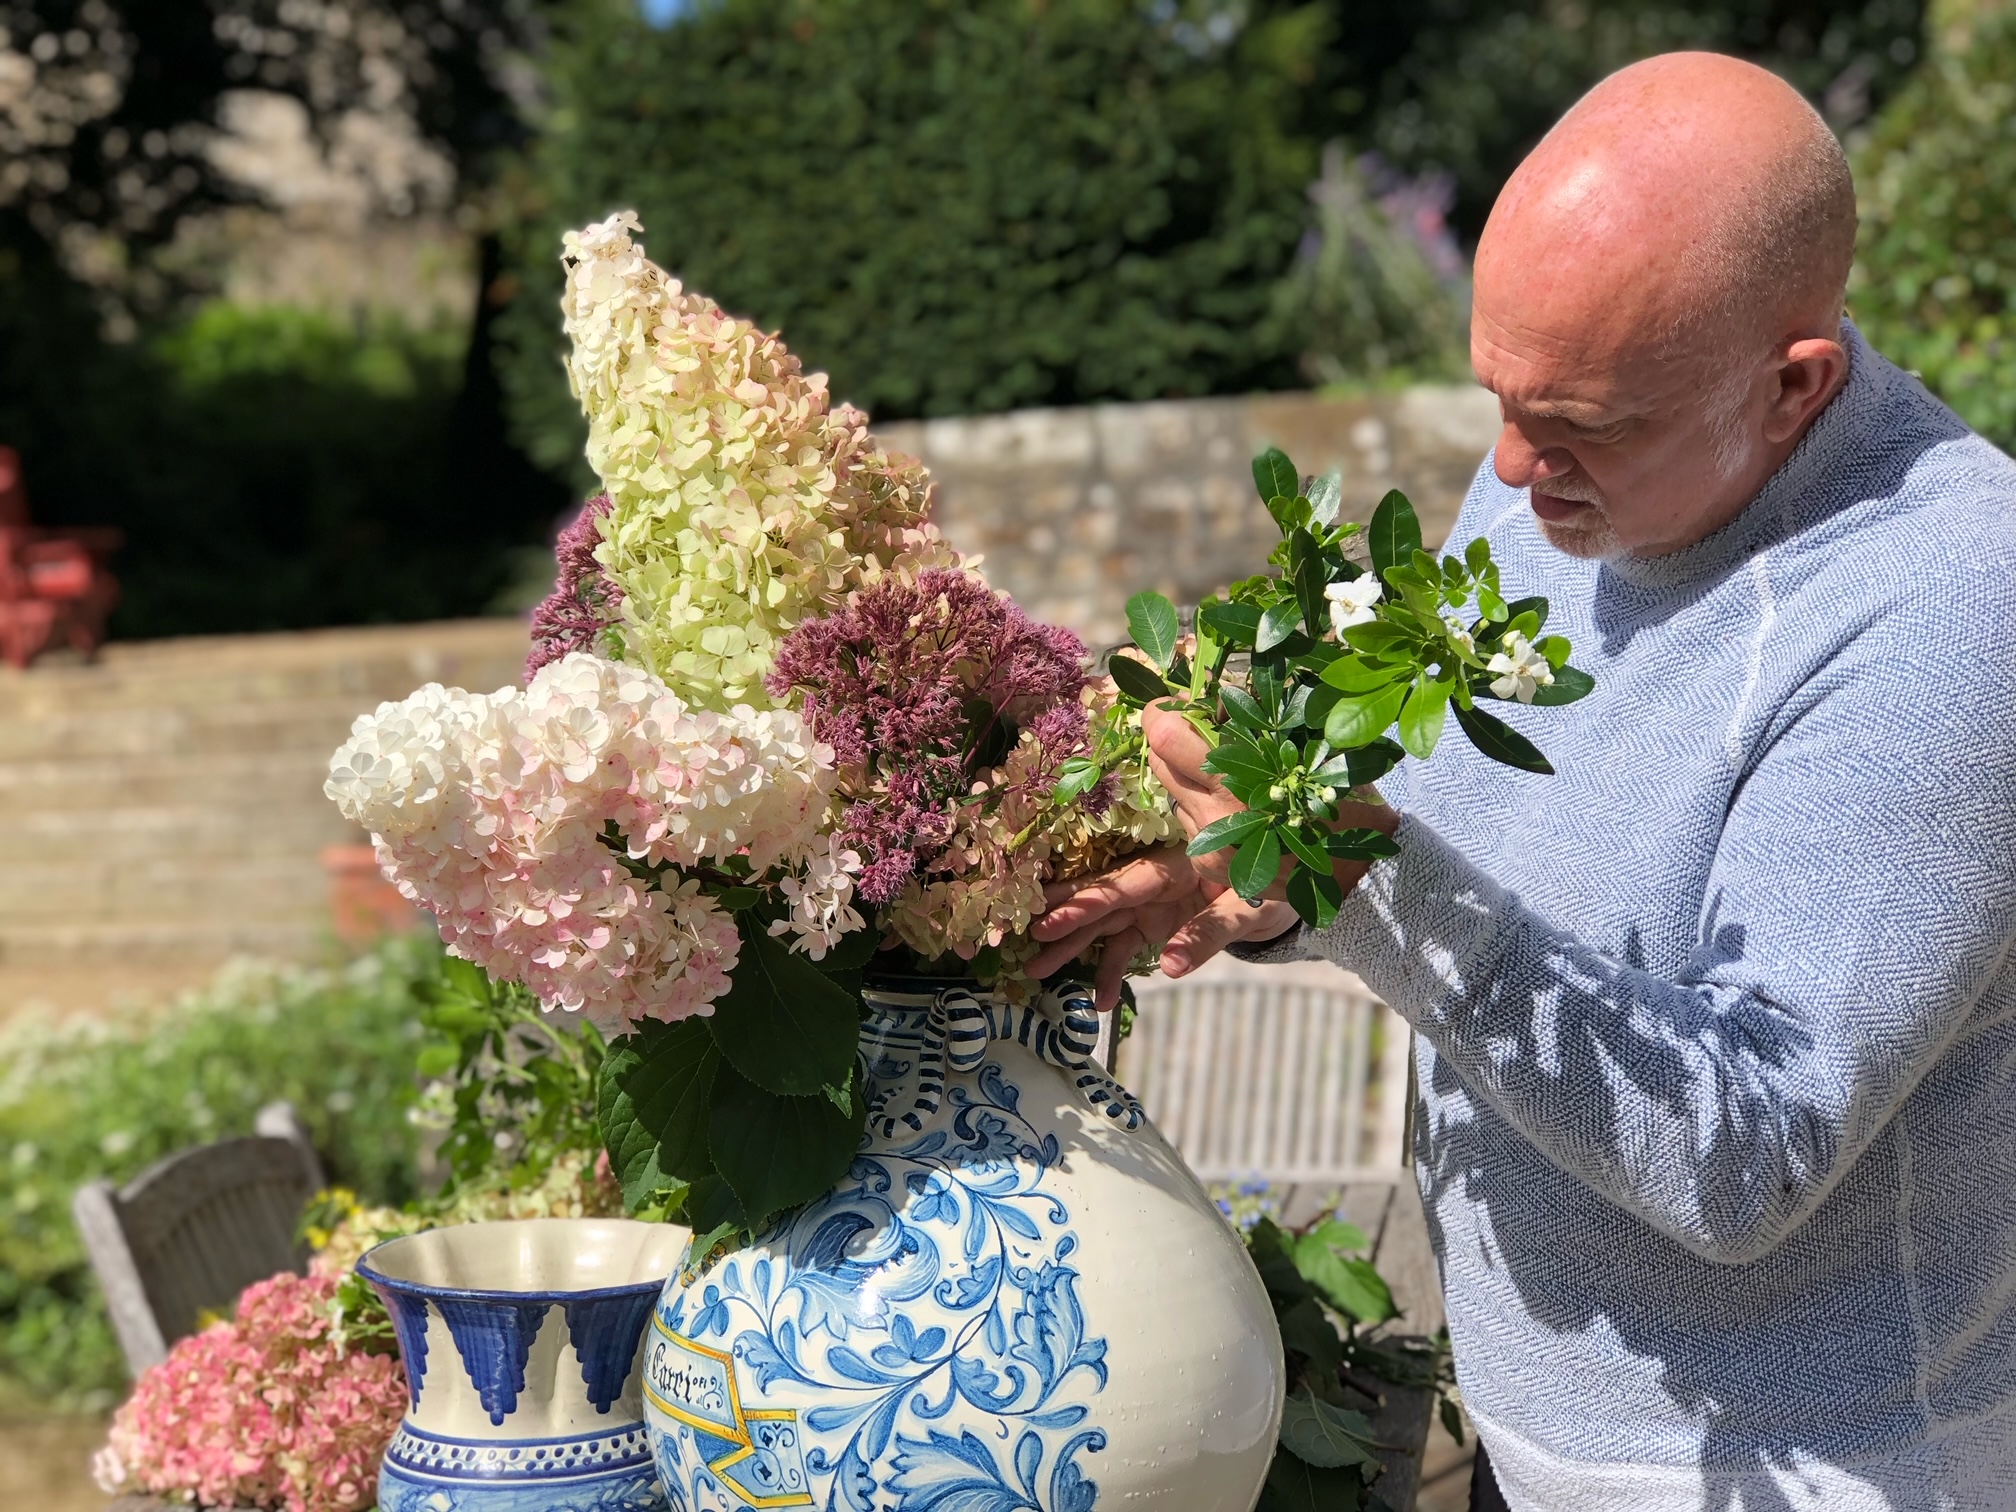 Jamie Merida adjusts pink and white cone hydrangeas in a blue and white chinoiserie vase.